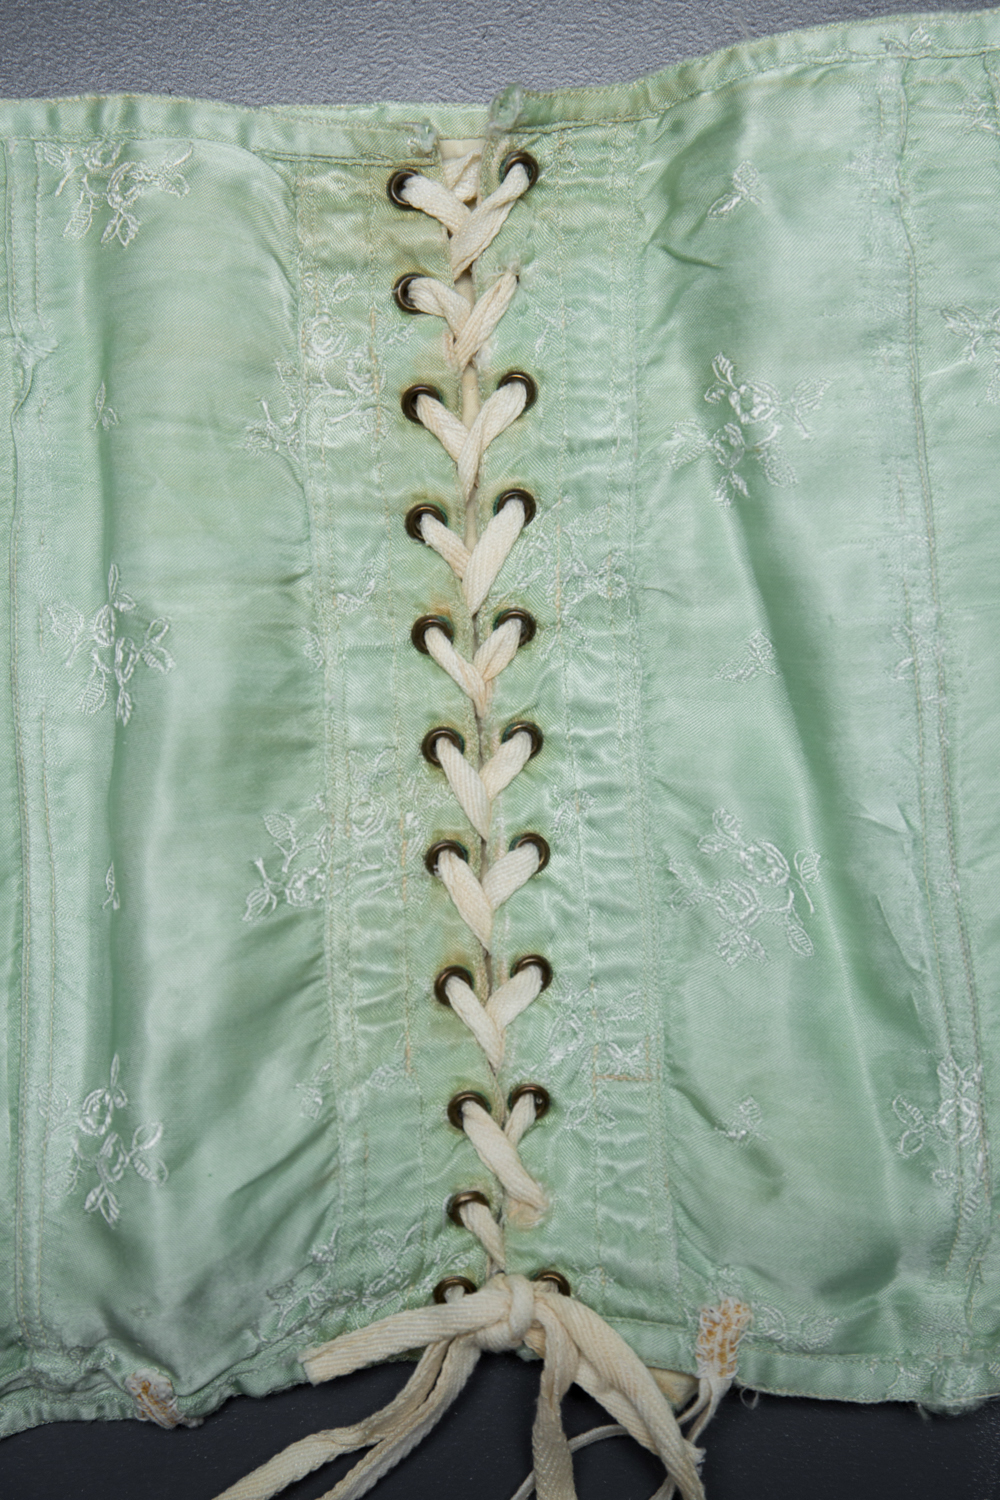 Short Green Brocade Girdle, c. 1920s, Russia. The Underpinnings Museum. Photography by Tigz Rice